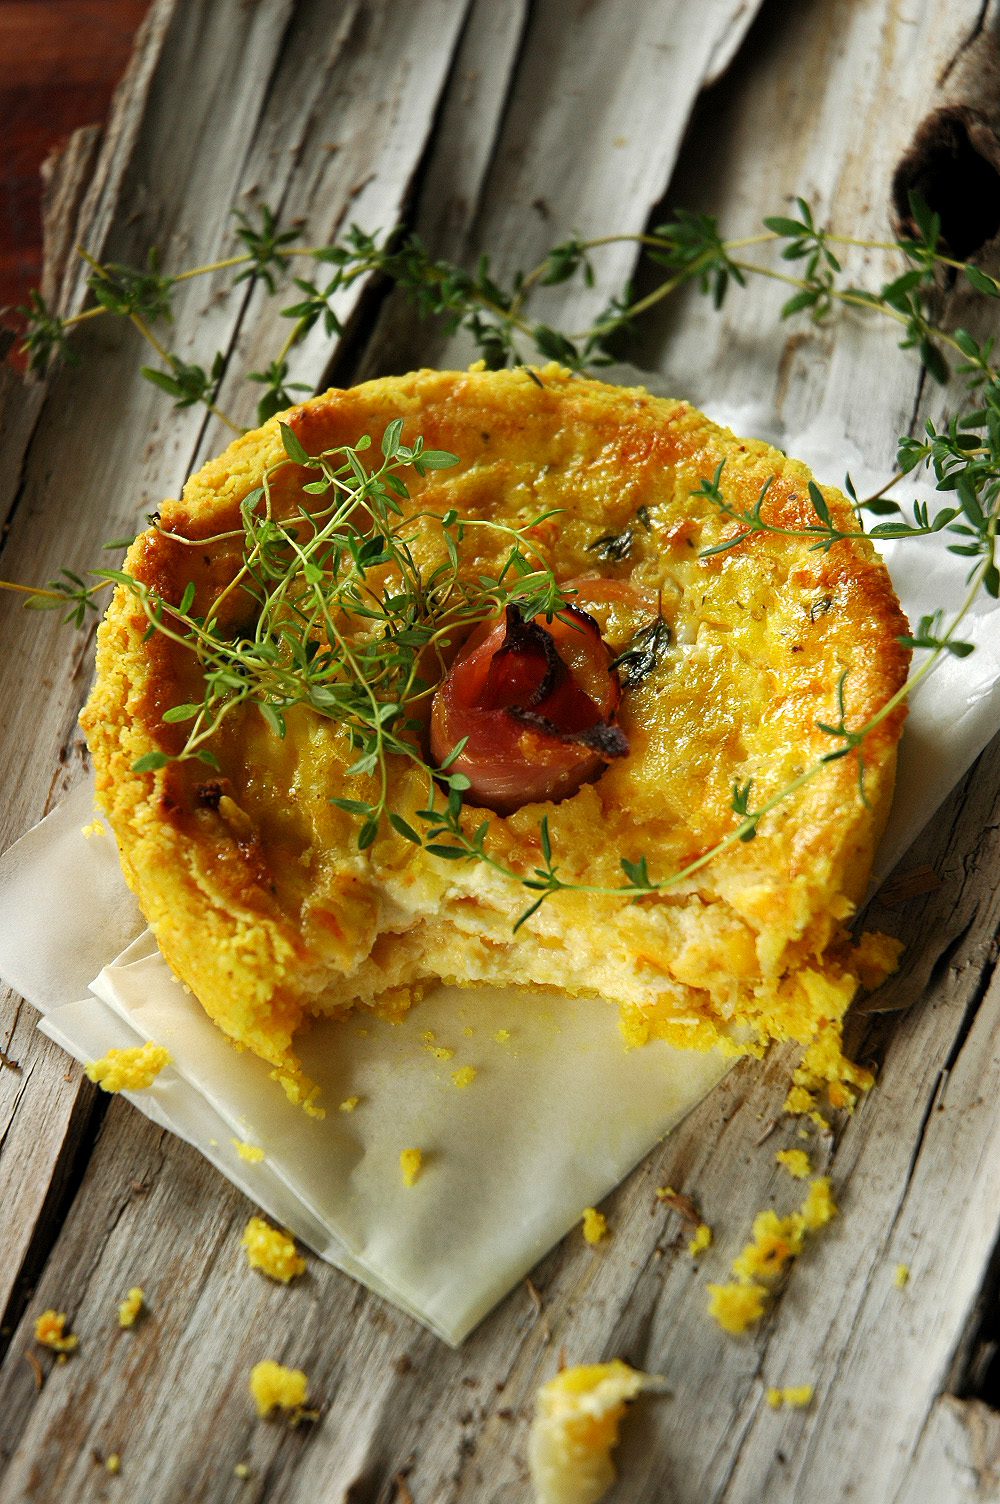 Another quiche recipe? Packed with South African flavors